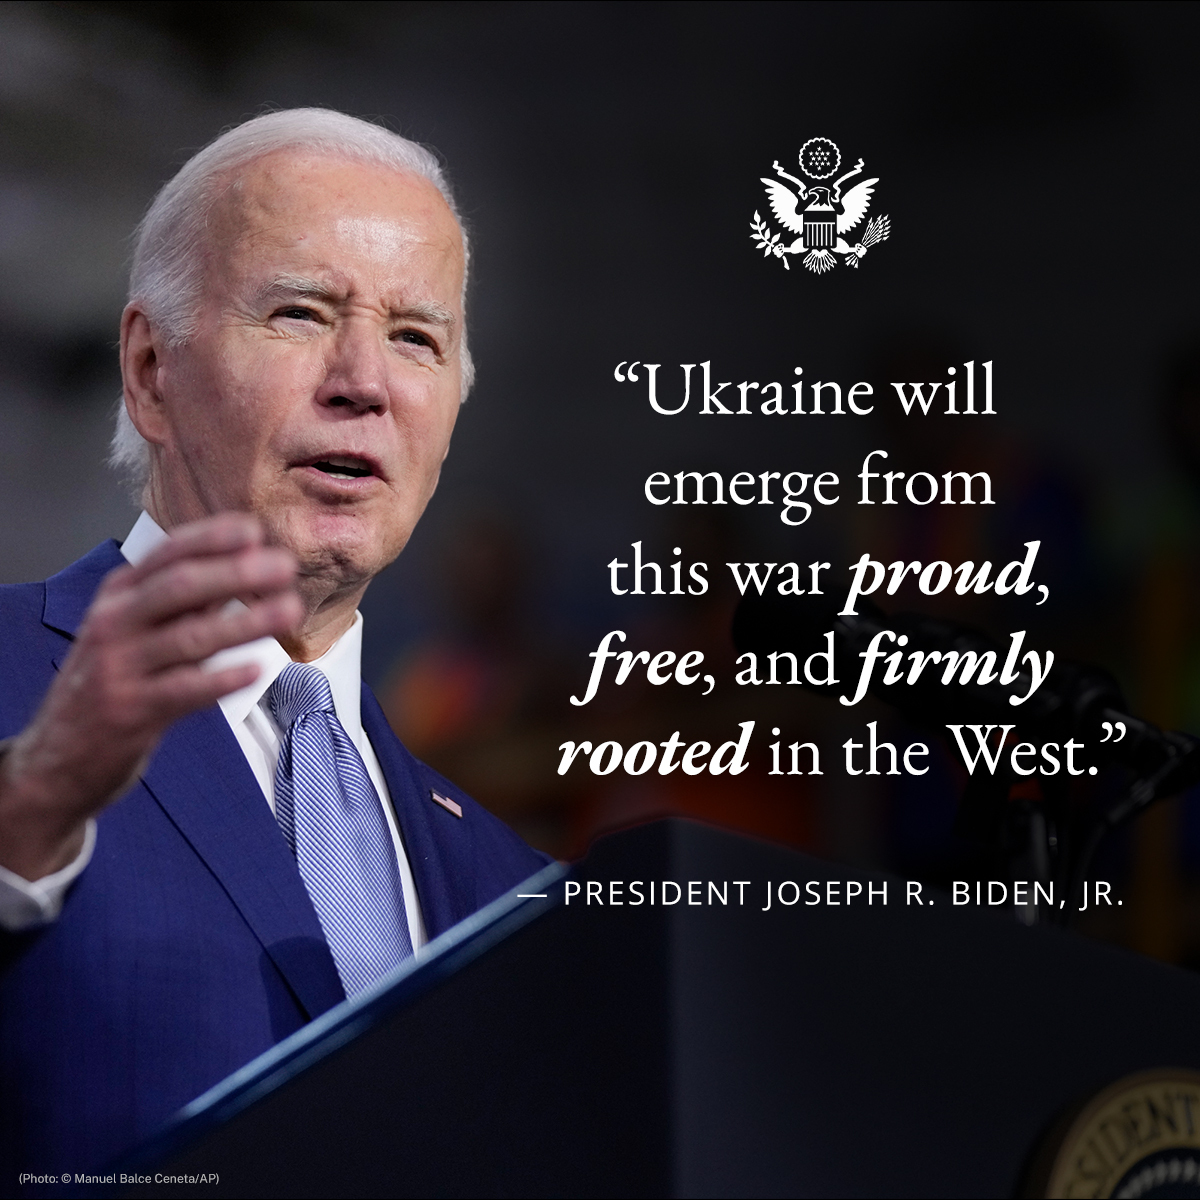 .@POTUS stressed that Russia will not outlast the collective support for Ukraine by a coalition of over 50 countries brought together by U.S. leadership in defense of a rules-based international order rooted in respect for sovereignty and territorial integrity of all states.